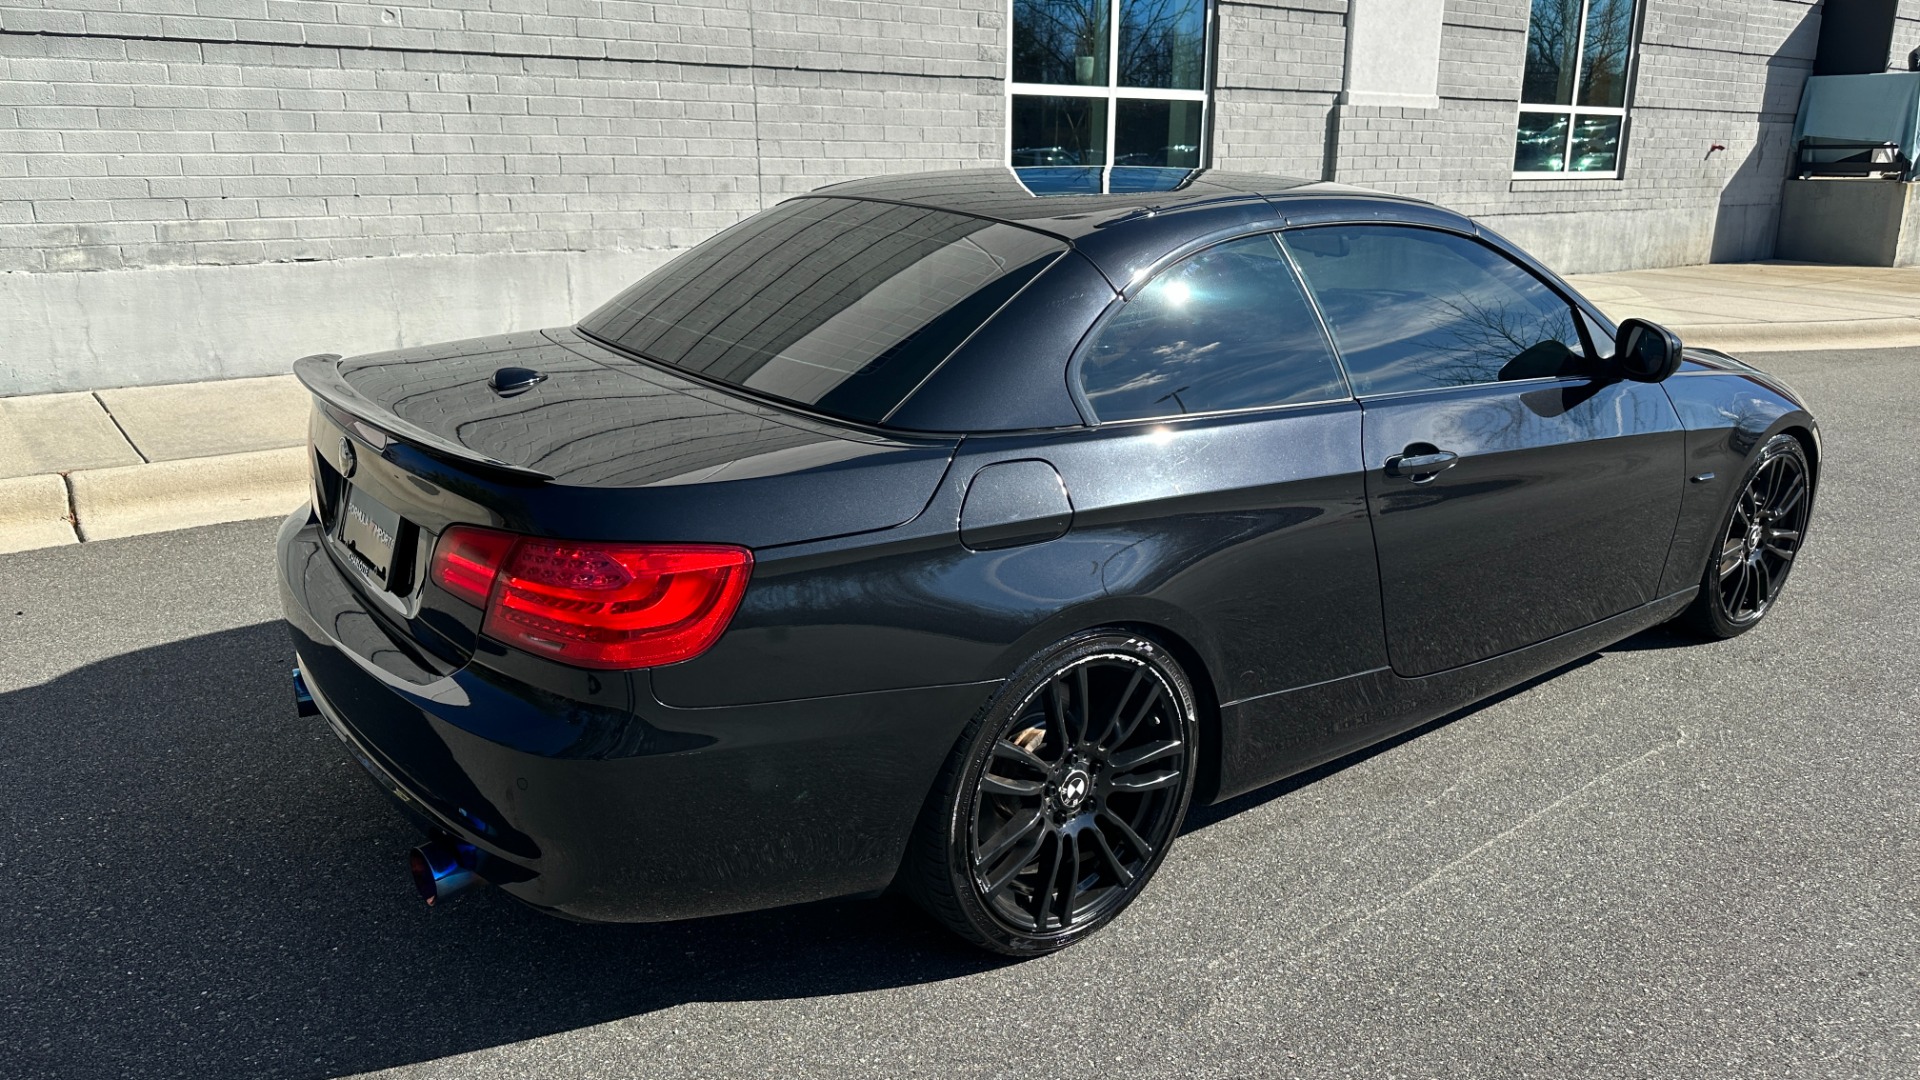 Used 2011 BMW 3 Series 335i / TURBO / HARD TOP CONVERTIBLE / LEATHER / BLACKOUT for sale $10,995 at Formula Imports in Charlotte NC 28227 4